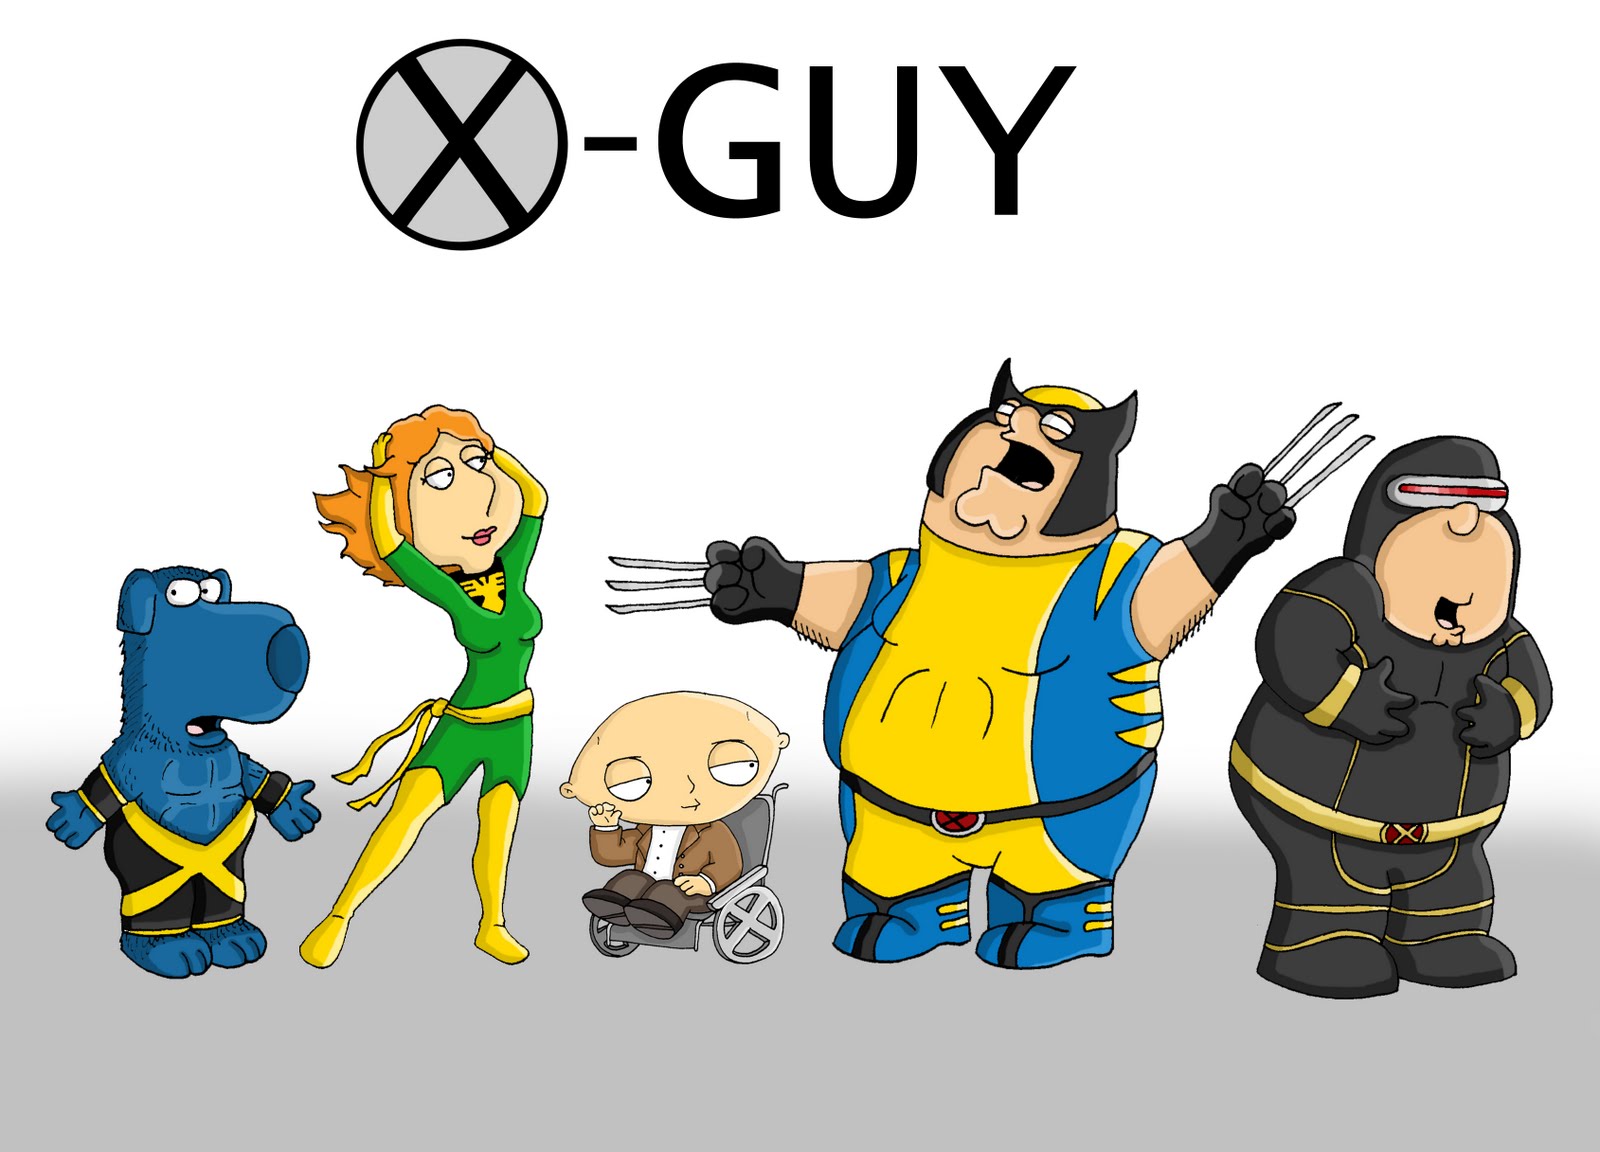 Here Is The Final Piece For Family Guy X Men Or As I Have